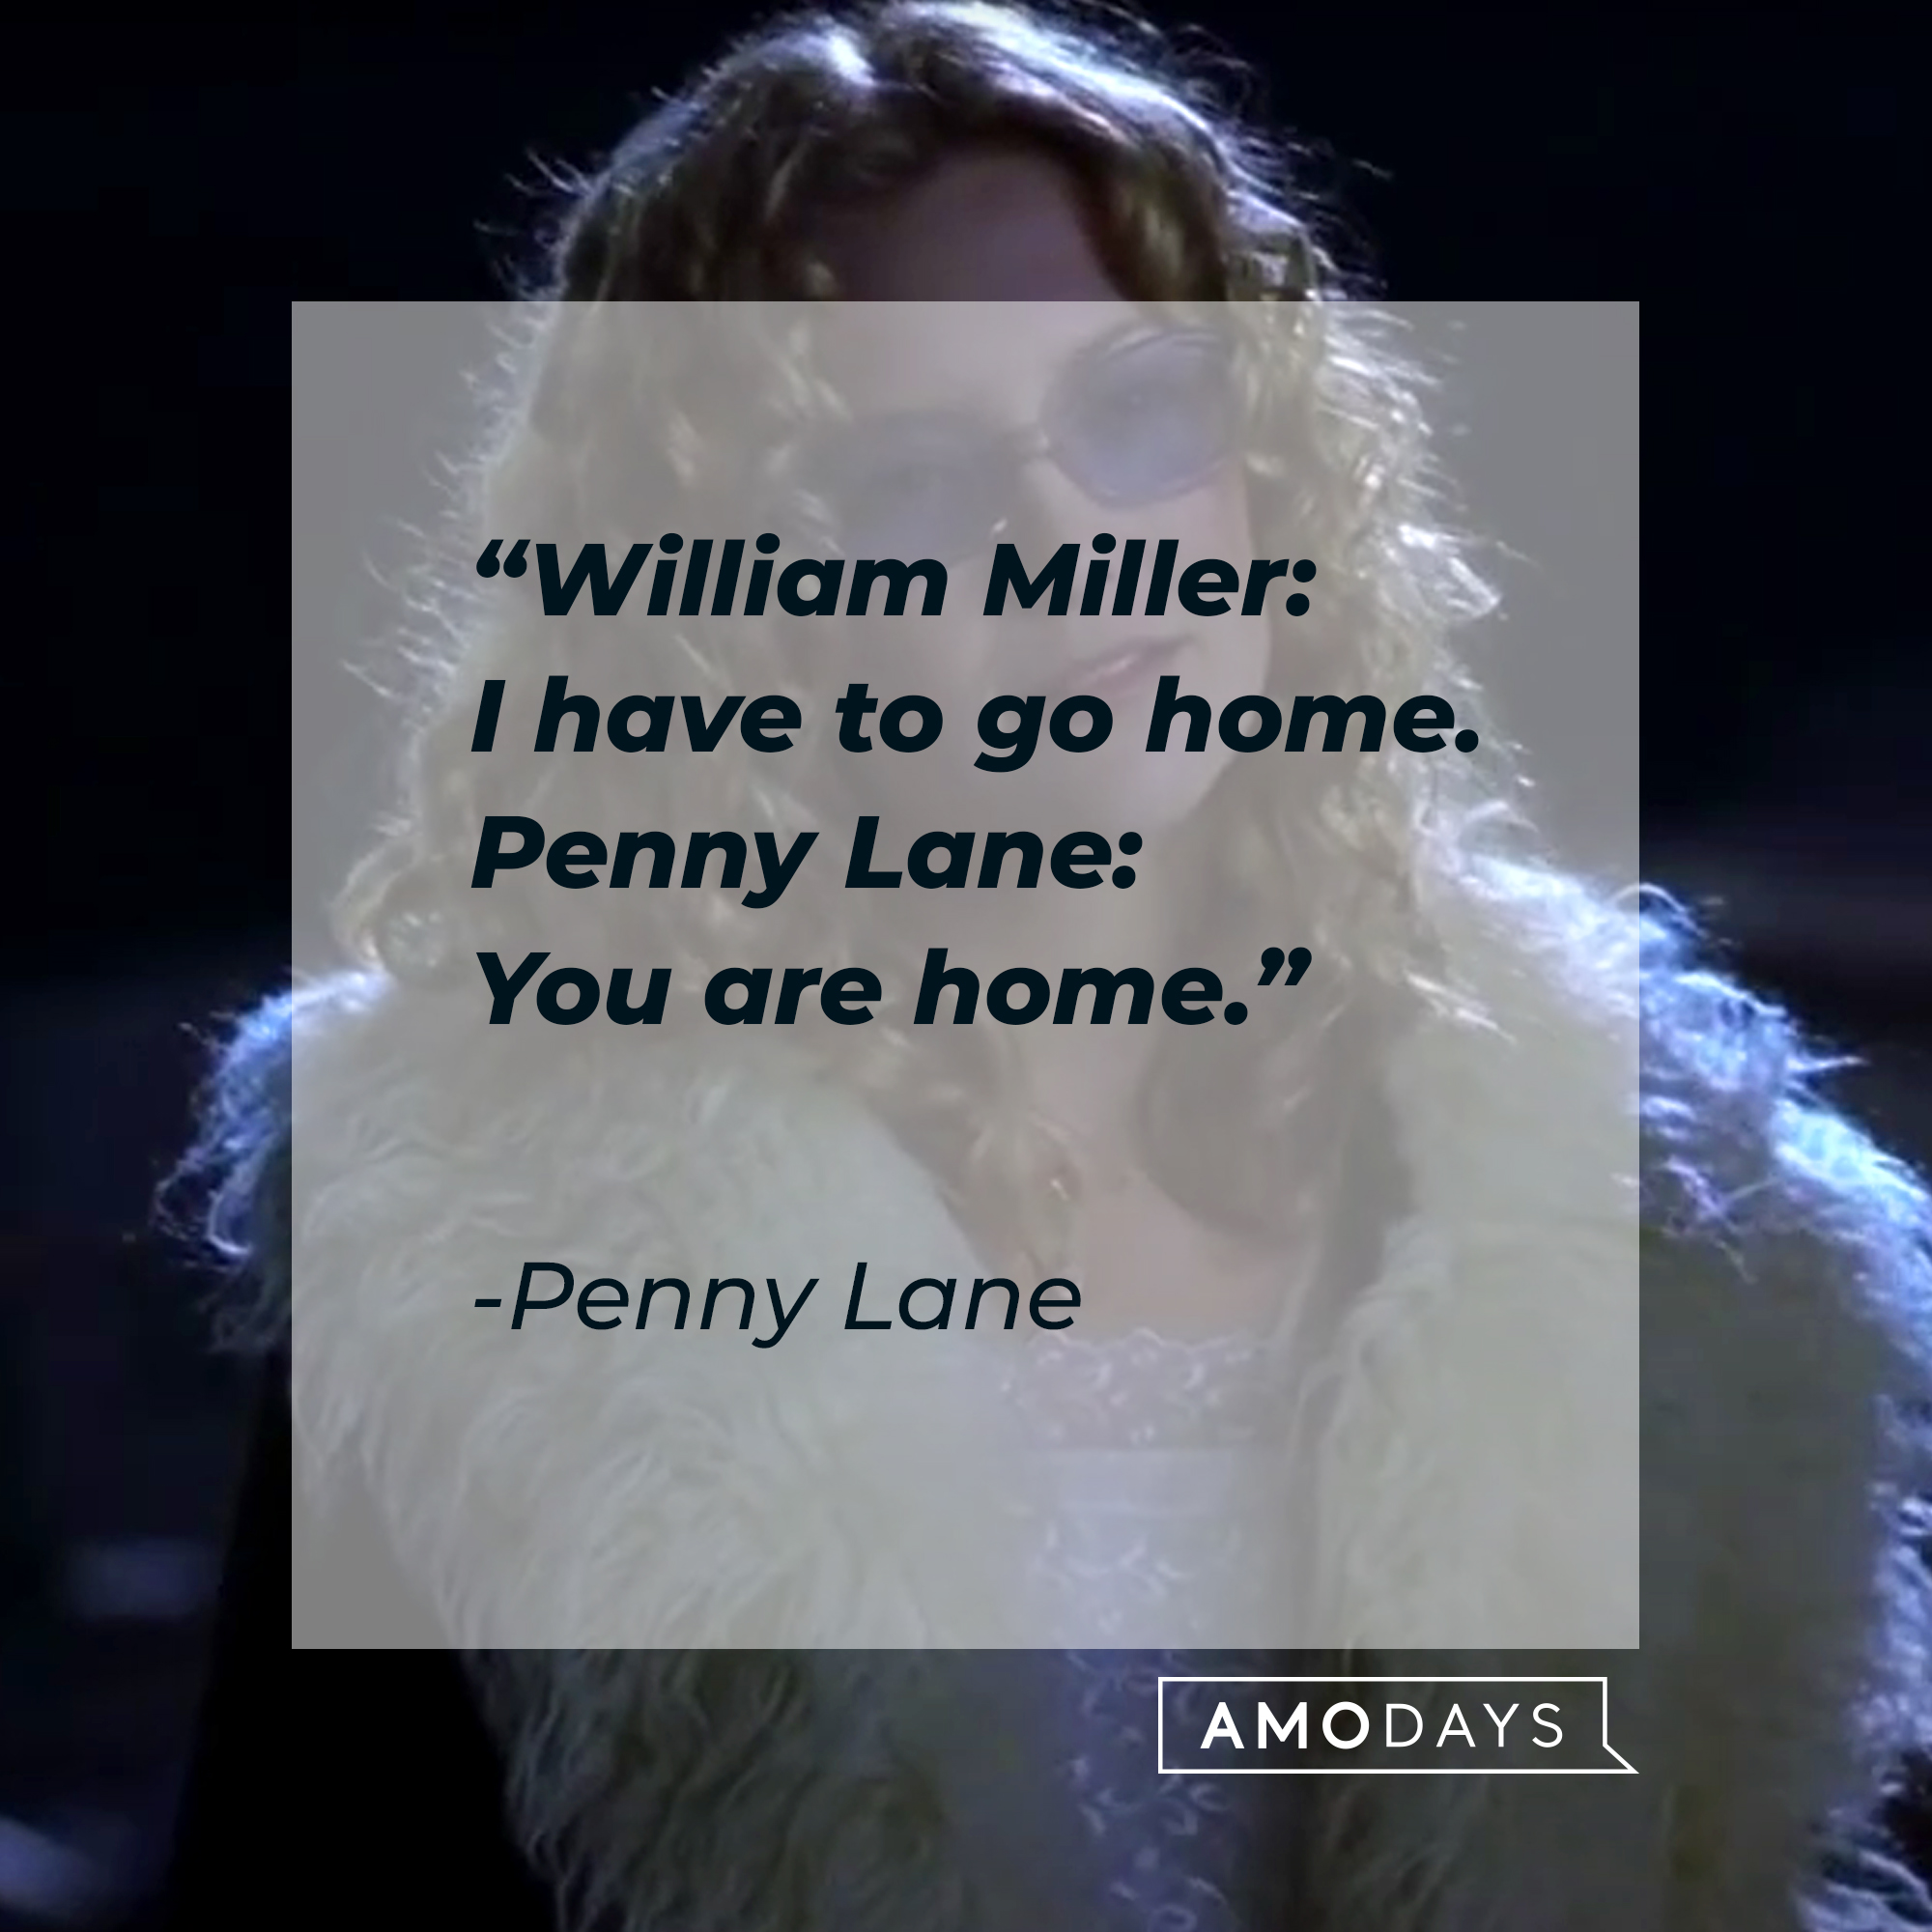 “William Miller: I have to go home.  Penny Lane: You are home.”